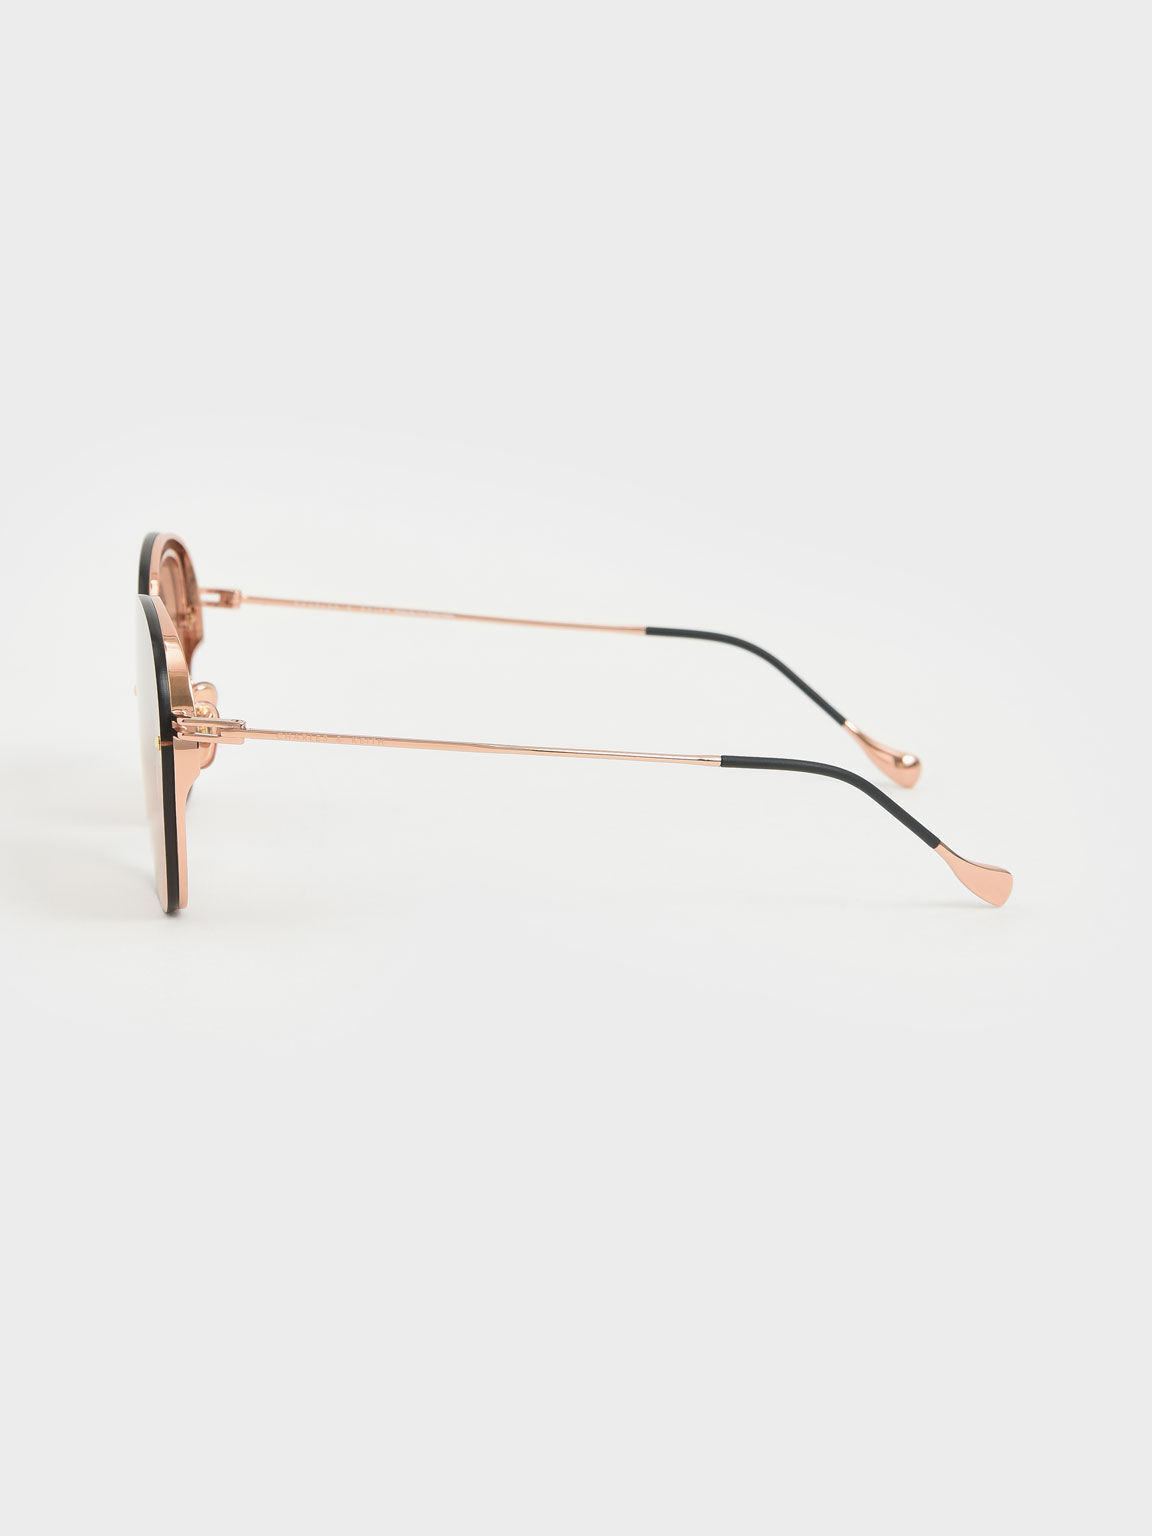 Wire Frame Butterfly Sunglasses, Rose Gold, hi-res